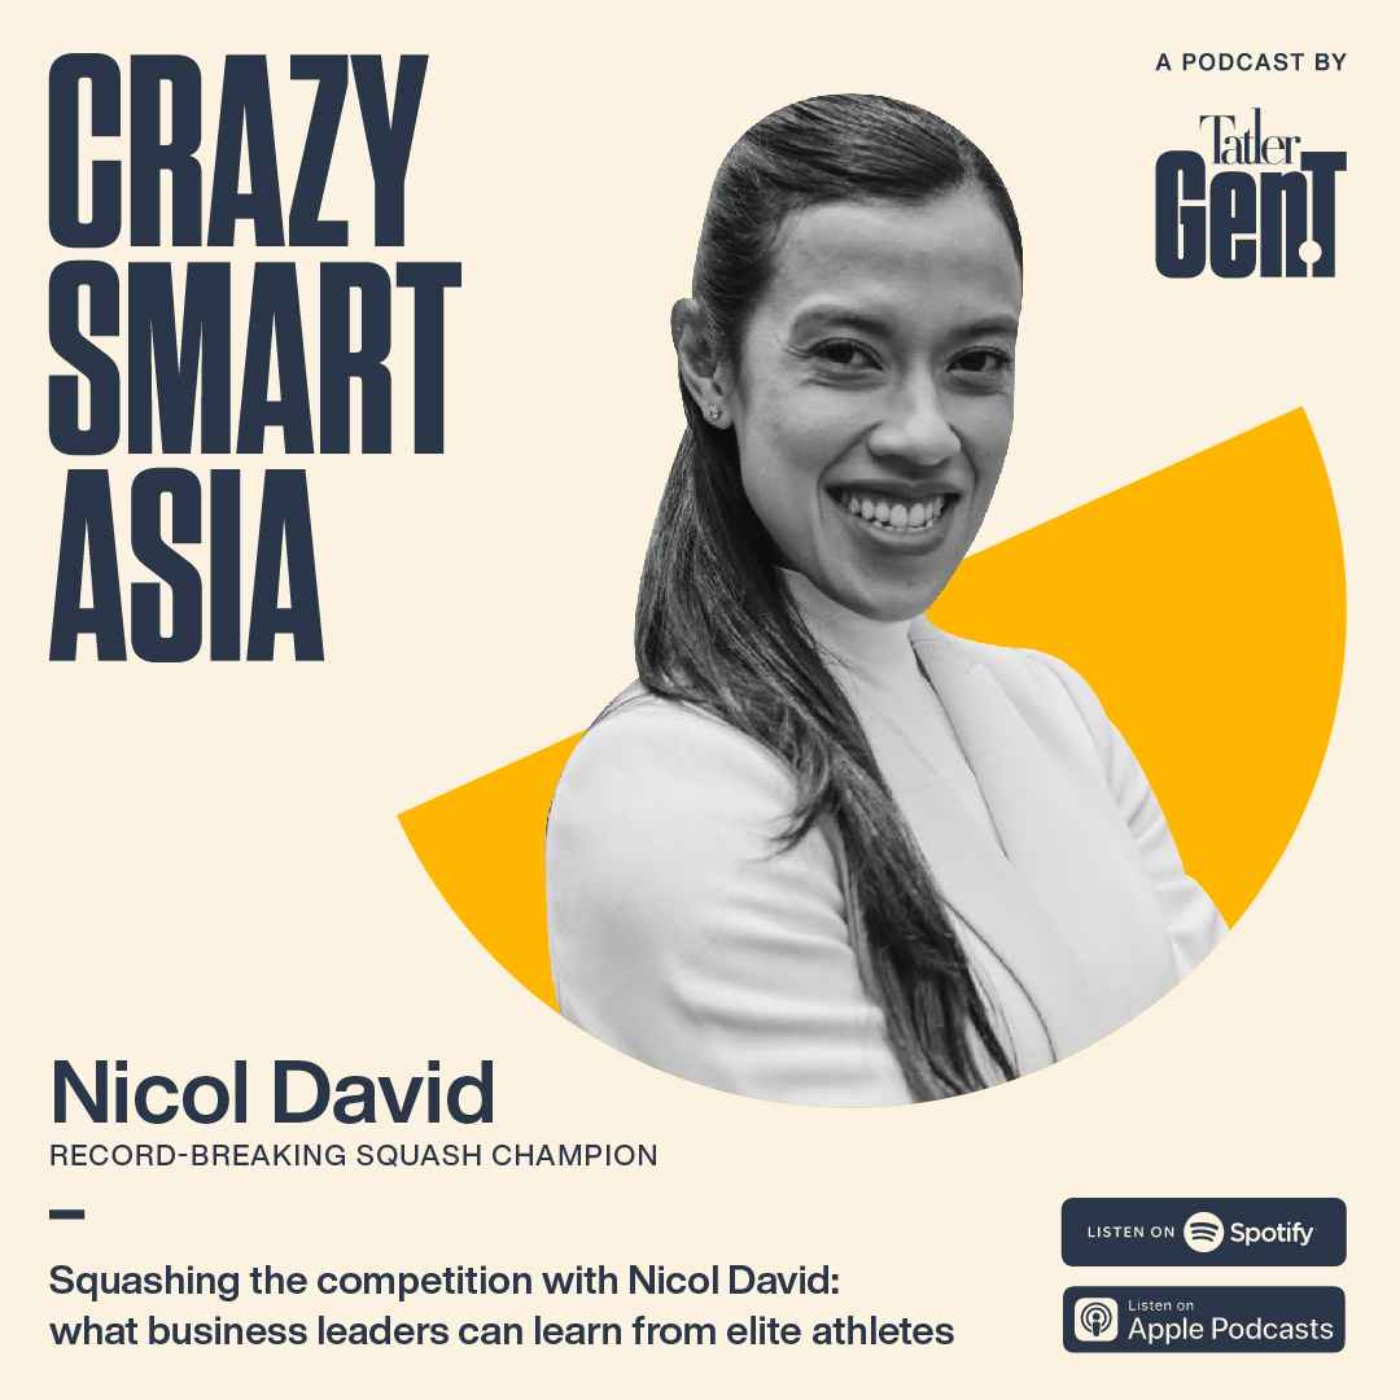 Squashing the competition with Nicol David: what business leaders can learn from elite athletes